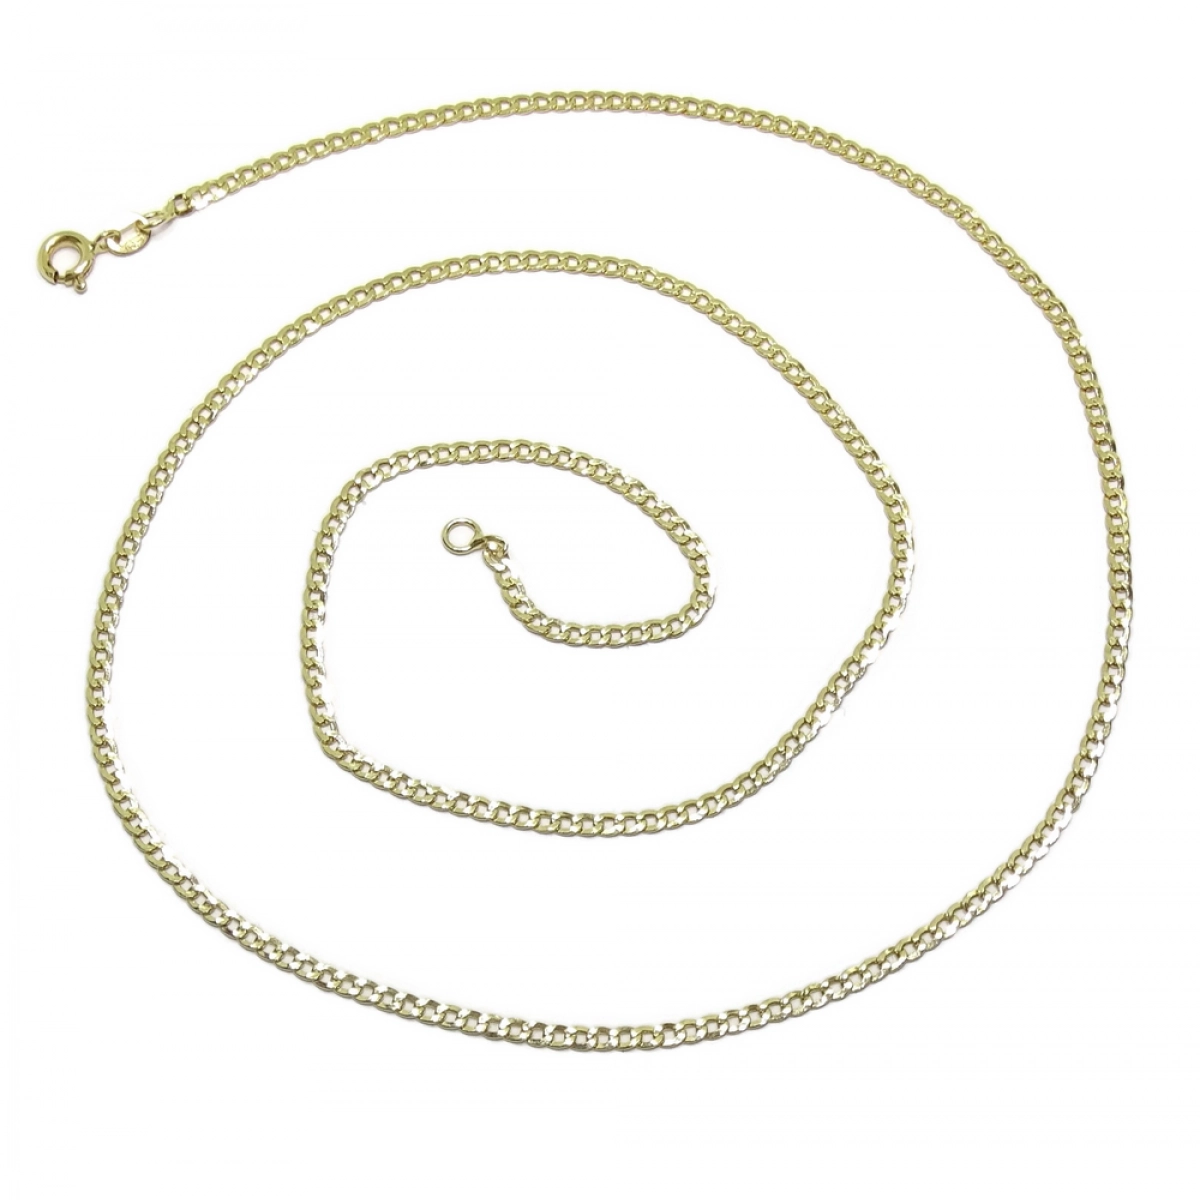 CHAIN DIAMOND CUT CURB IN 18K YELLOW GOLD 60CM MENS 2.00 MM THICK AND 4.15 G NEVER SAY NEVER